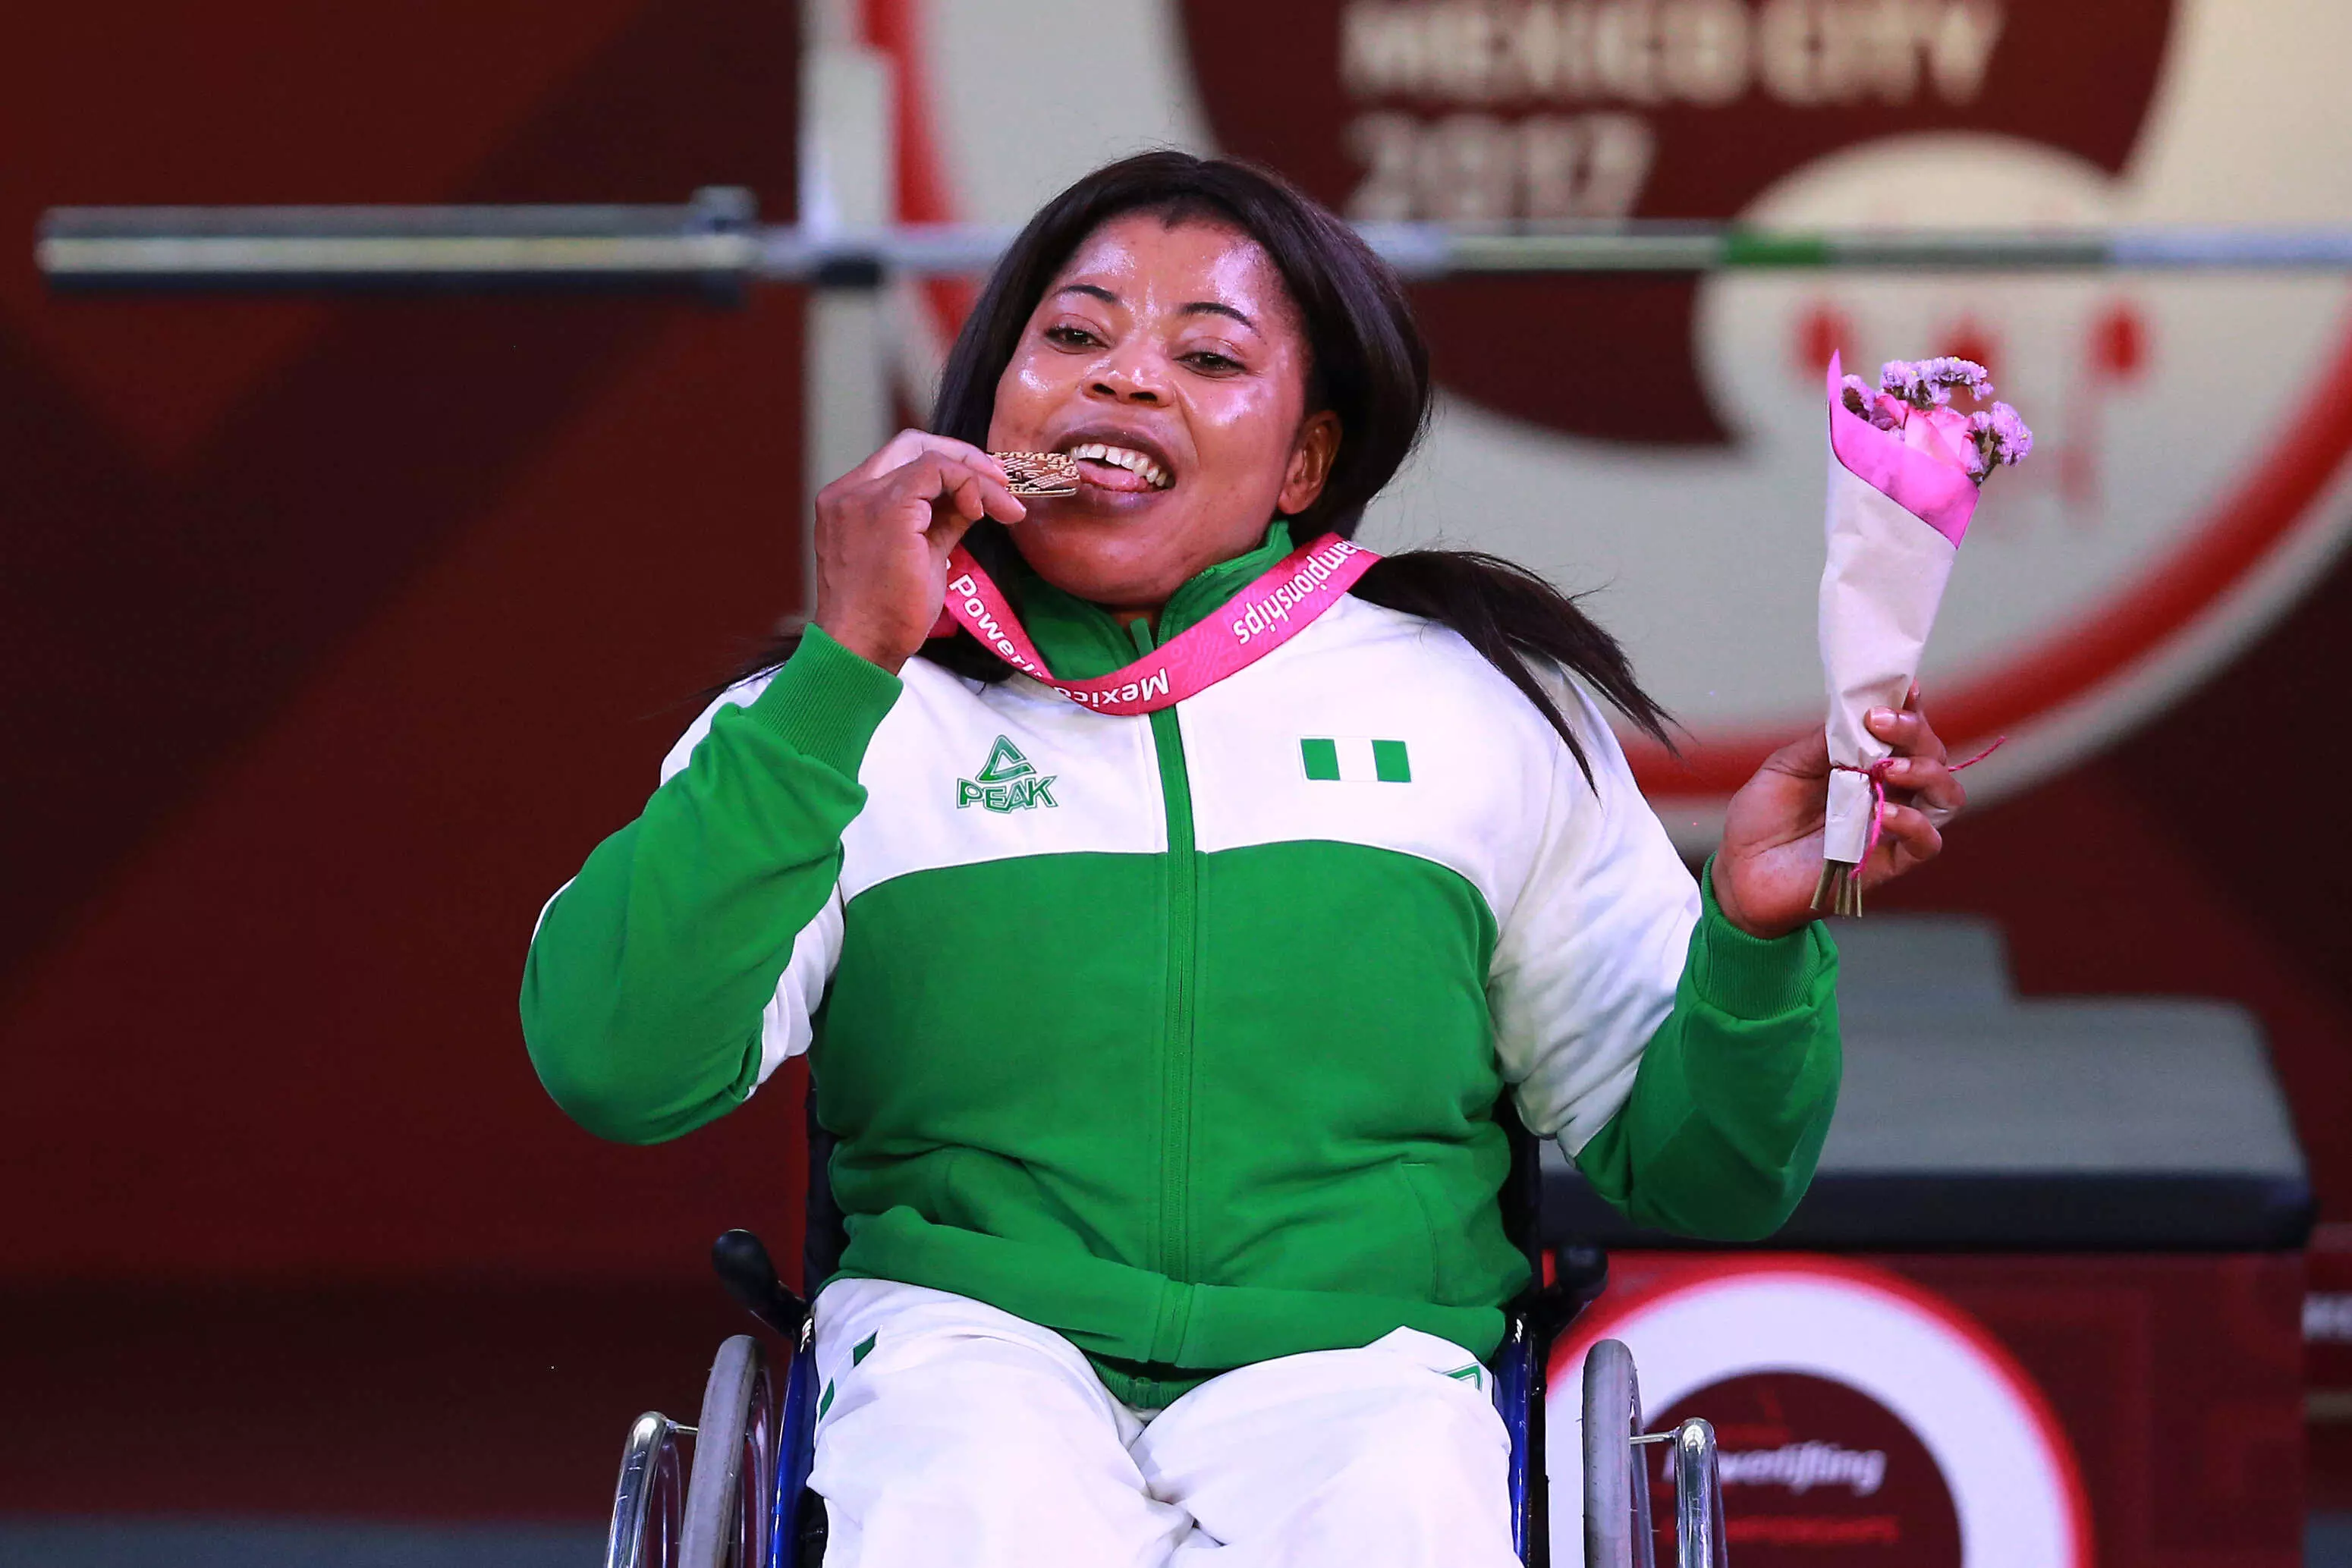 Sports won’t be the same after COVID-19, Paralympic gold medalist Ejike says